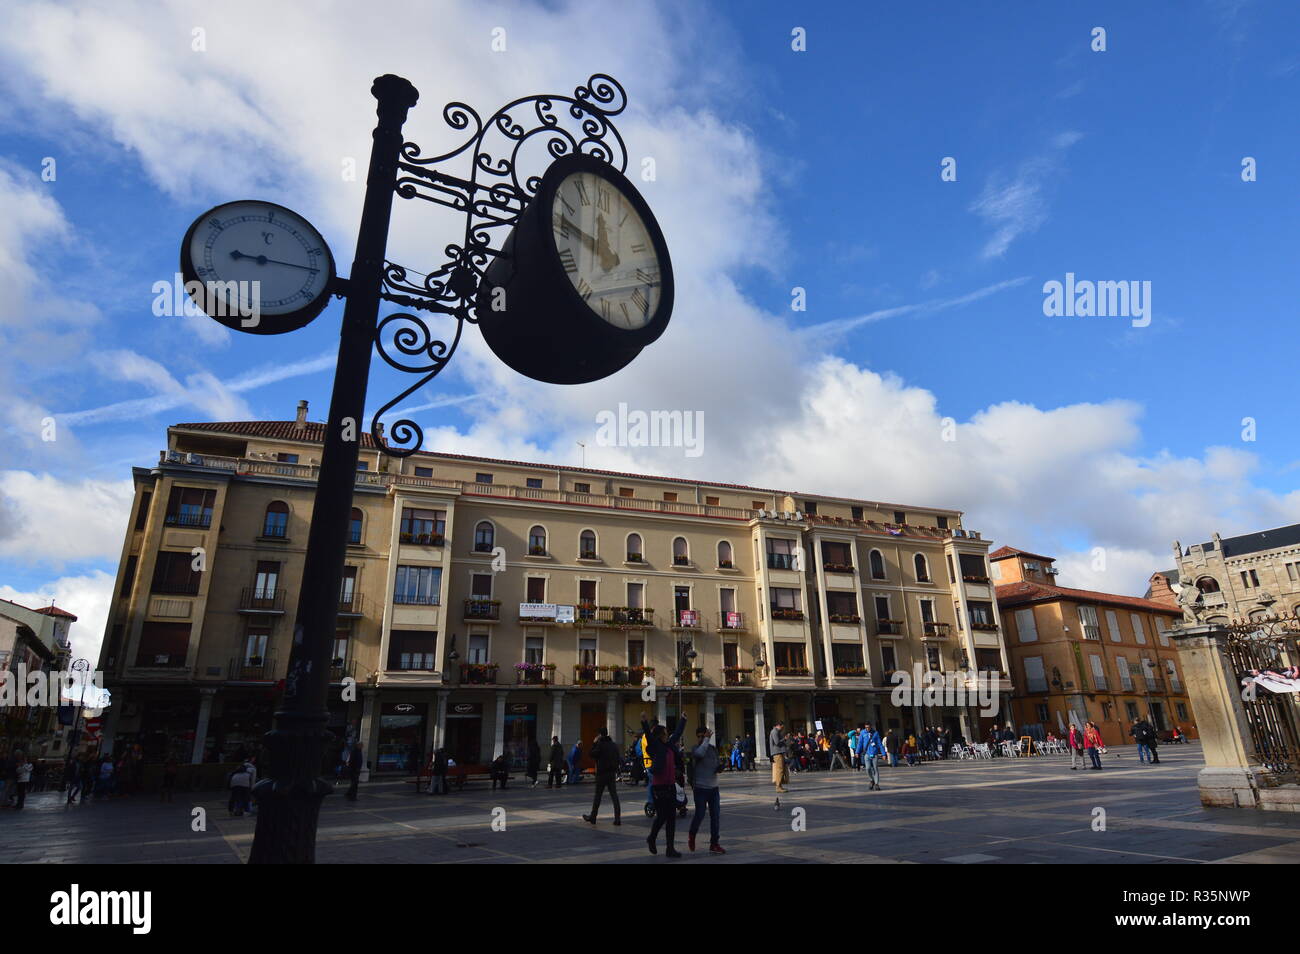 Beautiful Clock And Analog Thermometer With Beautiful Buildings Behind The Cathedral Square In Leon. Architecture, Travel, History, Street Photography Stock Photo